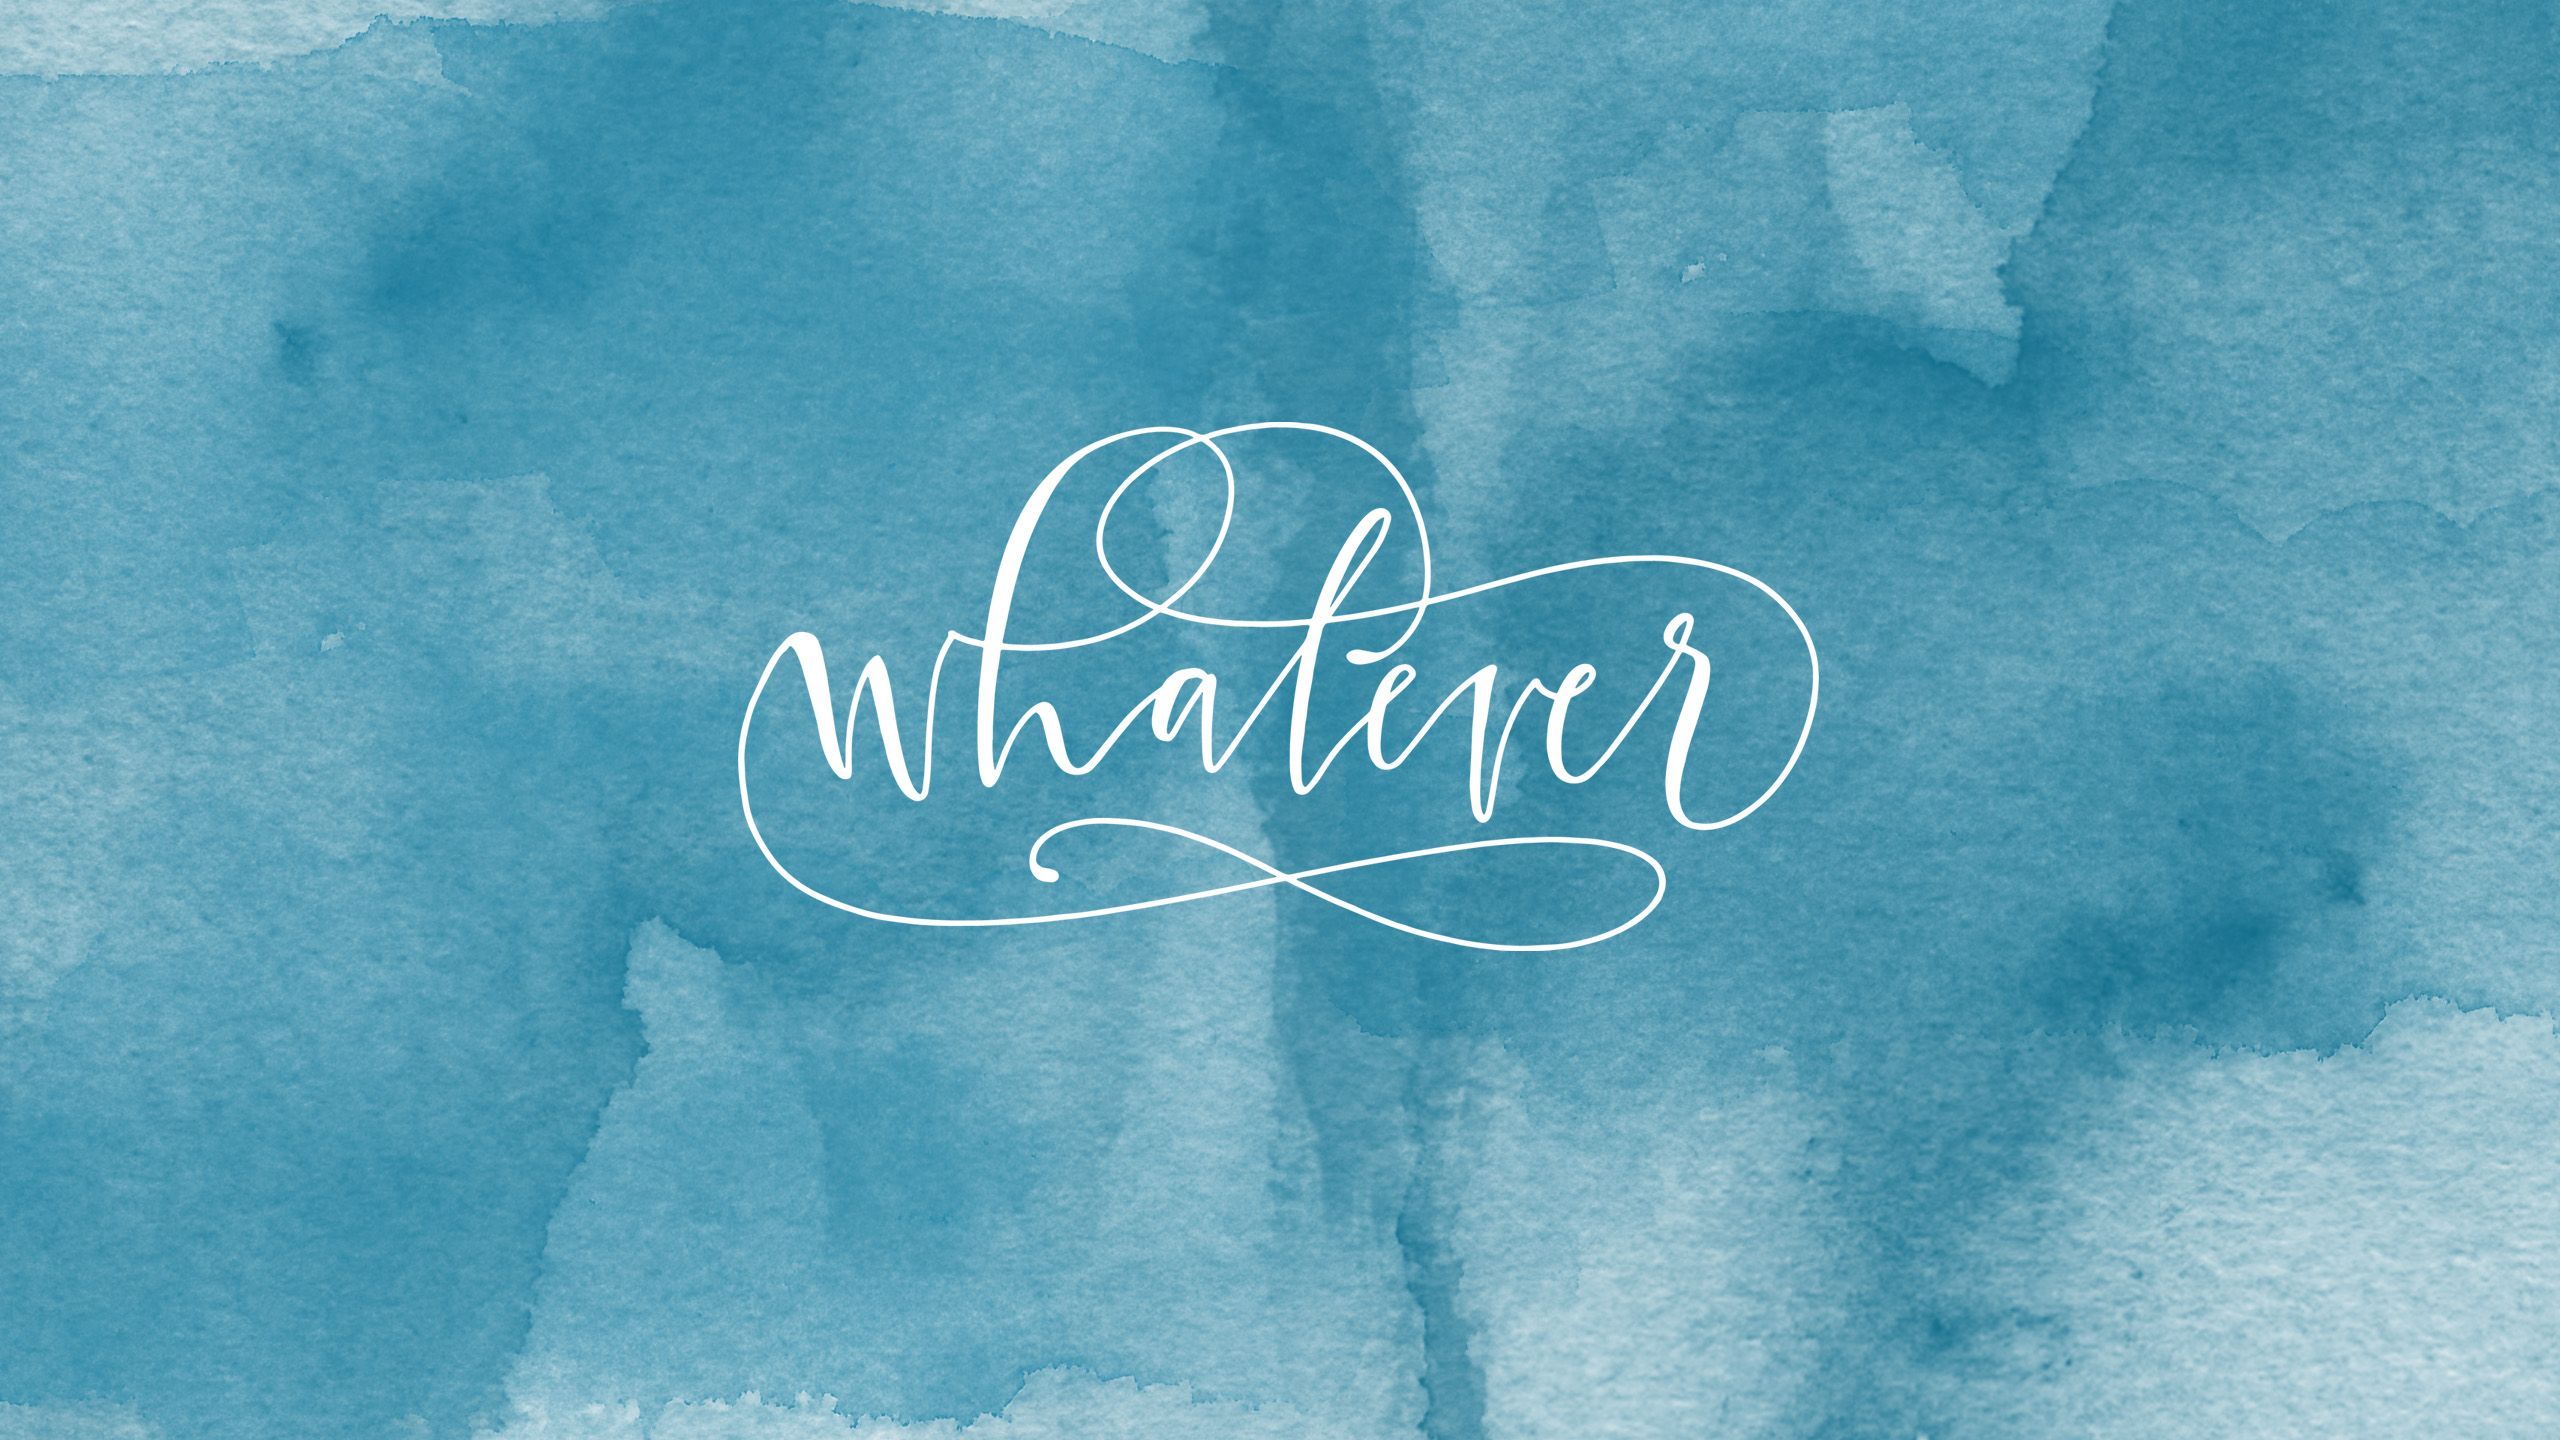 Whatever - a playful script font example image - Desktop, turquoise, 2560x1440, aqua, cyan, teal, calligraphy, blue